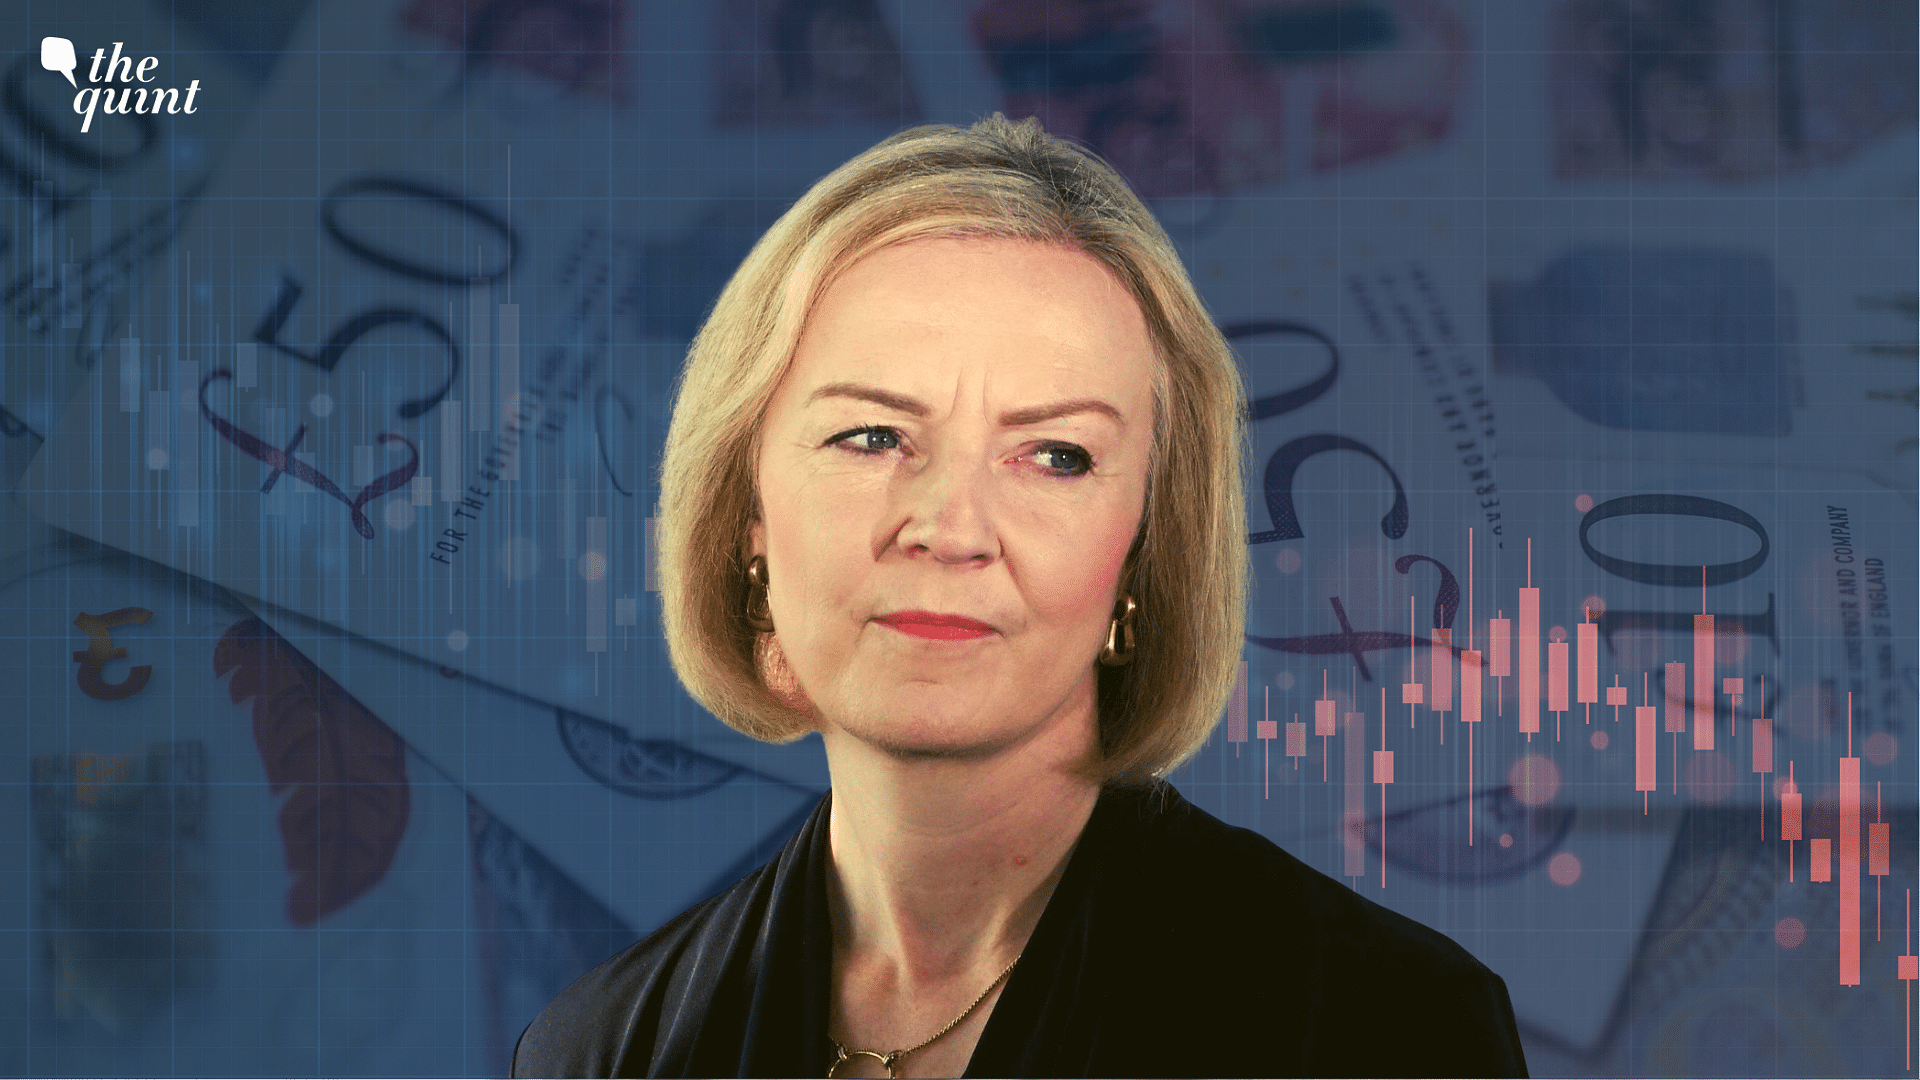 <div class="paragraphs"><p>The <a href="https://www.thequint.com/topic/uk-economy">United Kingdom’s economy</a> is in crisis with Prime Minister <a href="https://www.thequint.com/topic/liz-truss">Liz Truss</a> doubling down on her $50 billion ( £45 billion) tax cuts package, that has left the country’s stock markets in disarray.</p></div>